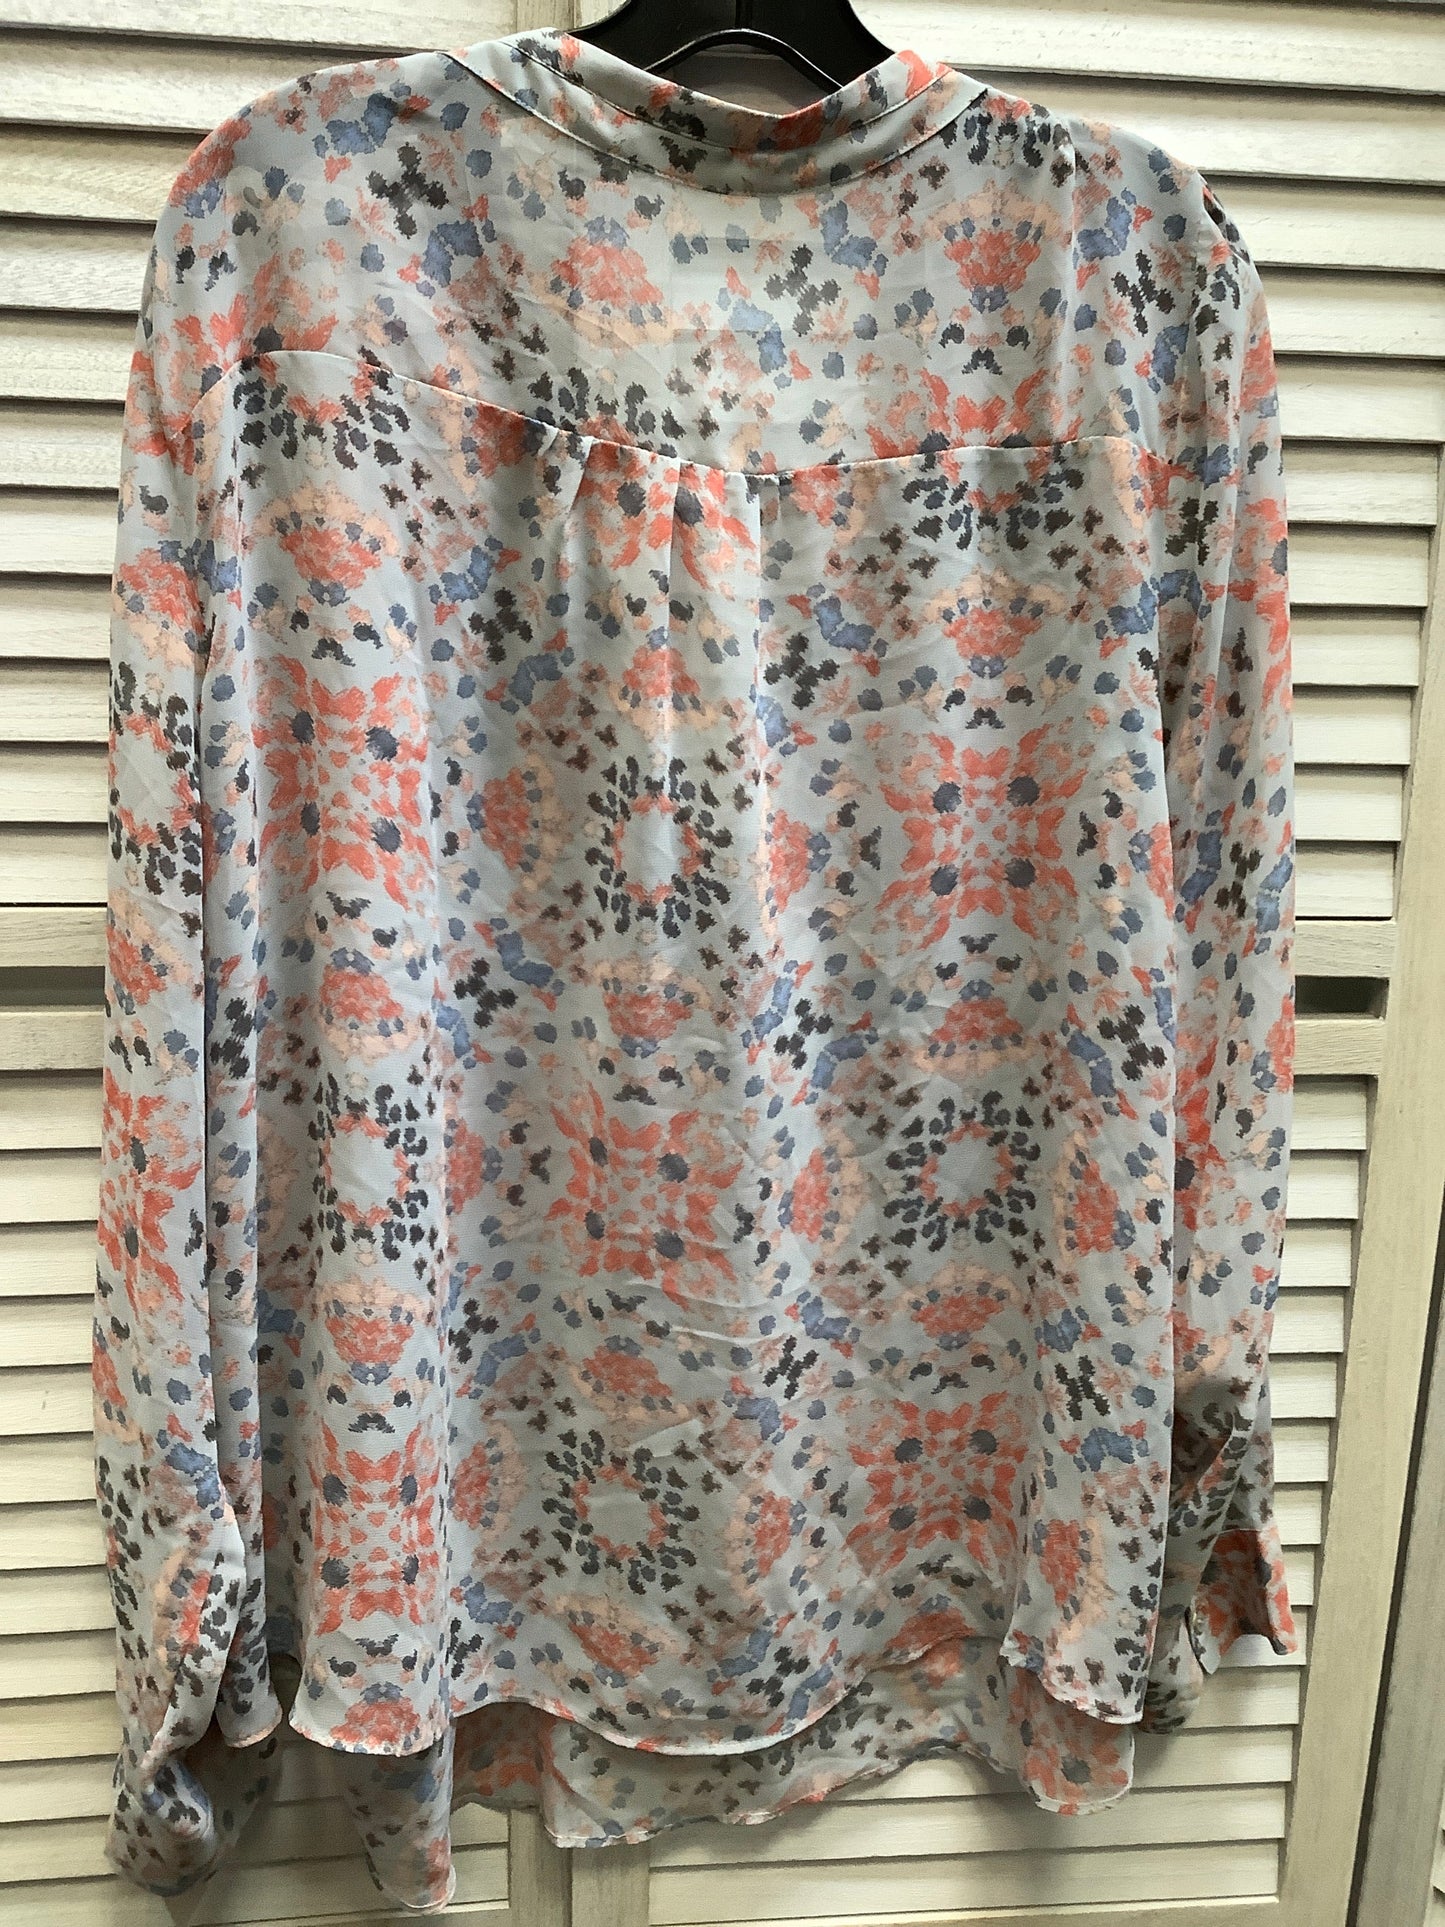 Multi-colored Top Long Sleeve Basic Ana, Size 3x